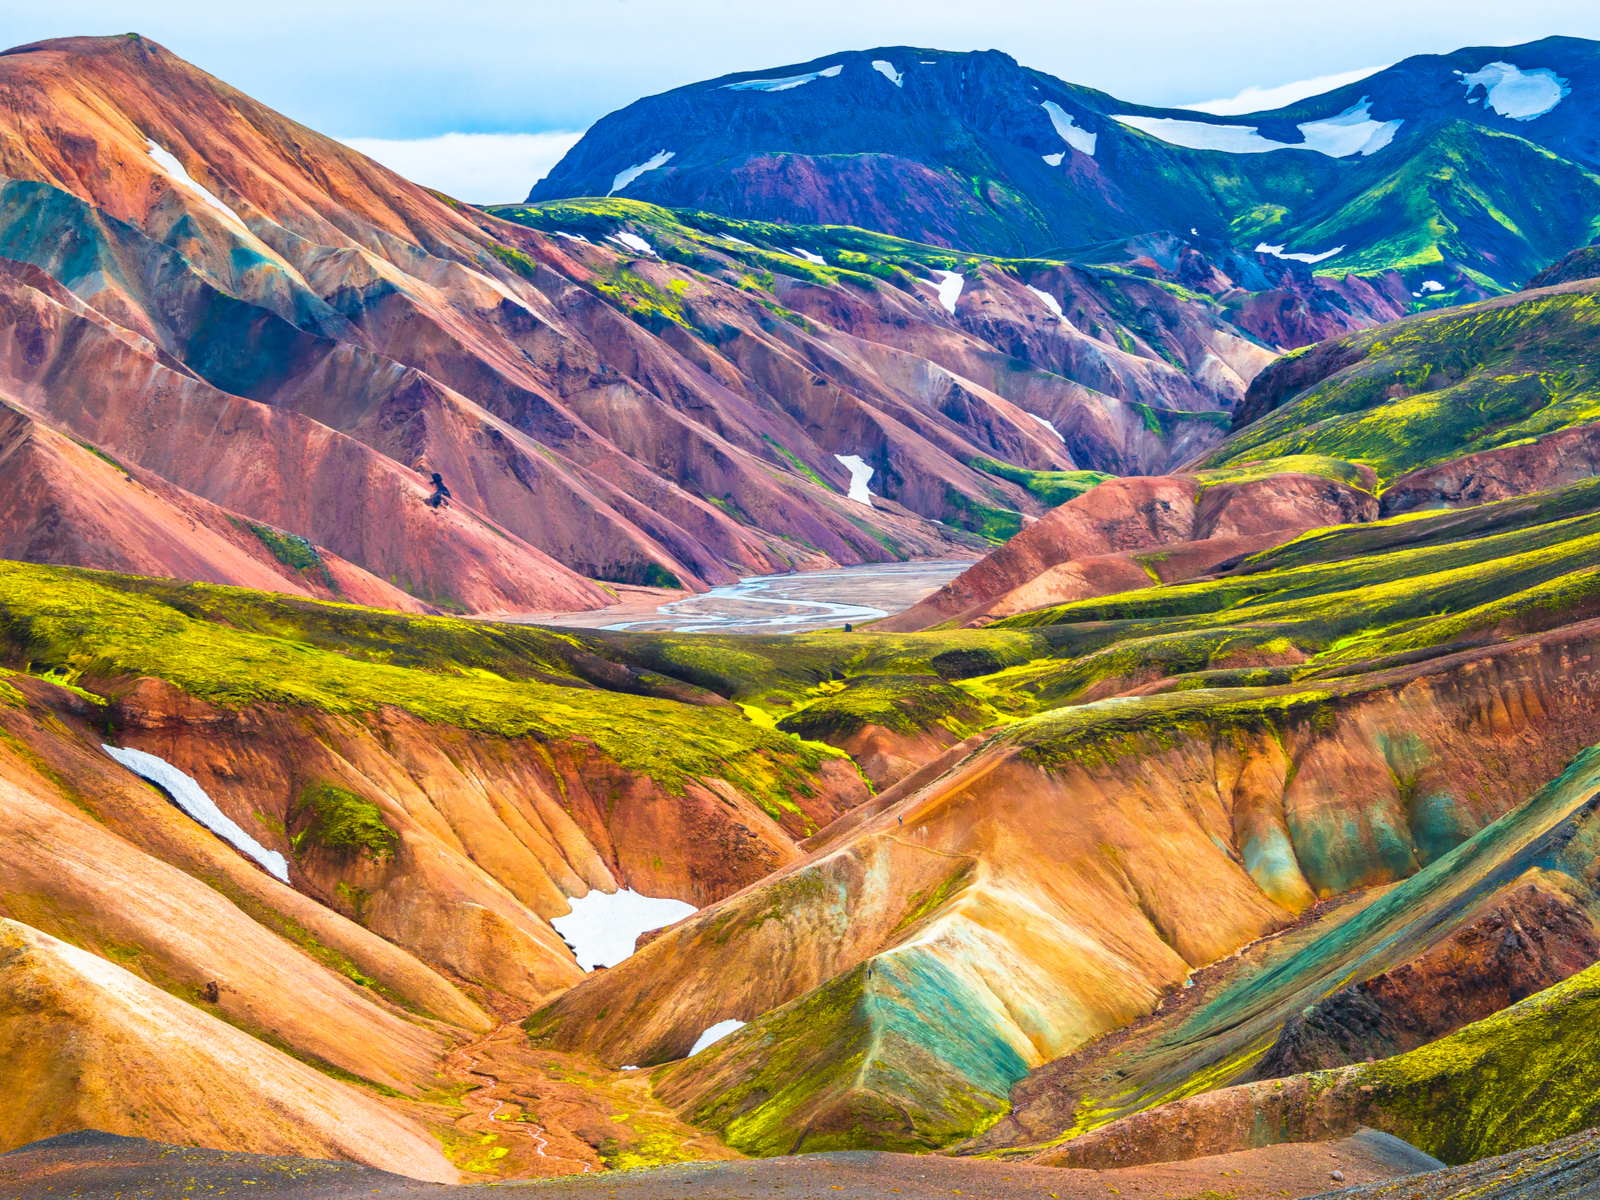 Landmannalaugar Trails, one of the best hikes in Iceland, pictured from the summit